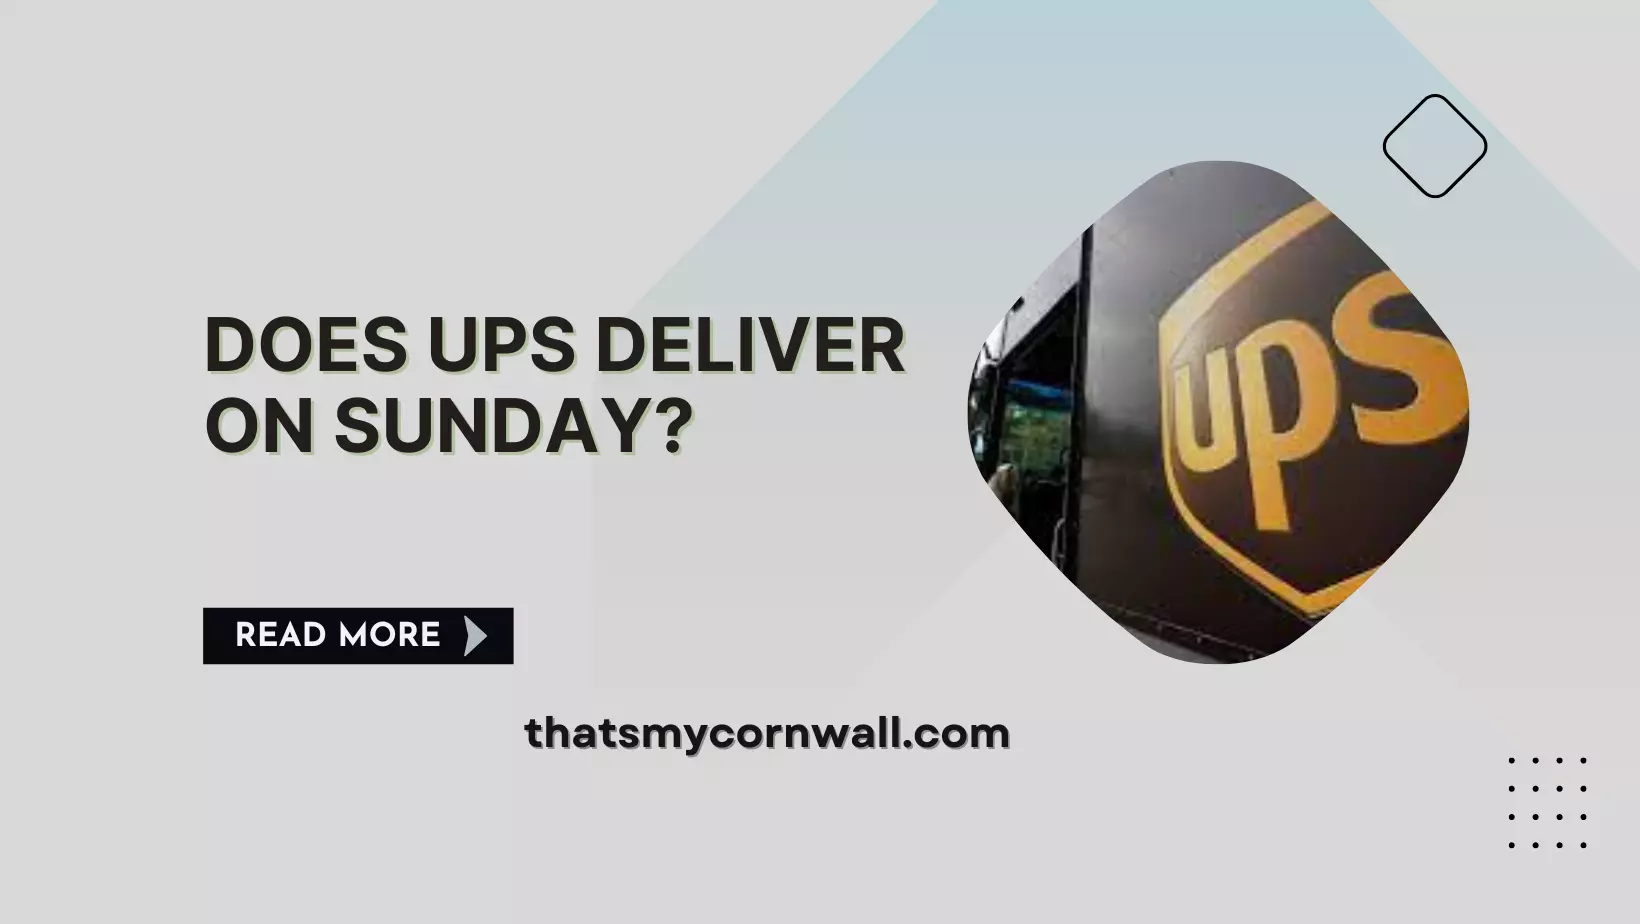 Does UPS Deliver on Sunday?